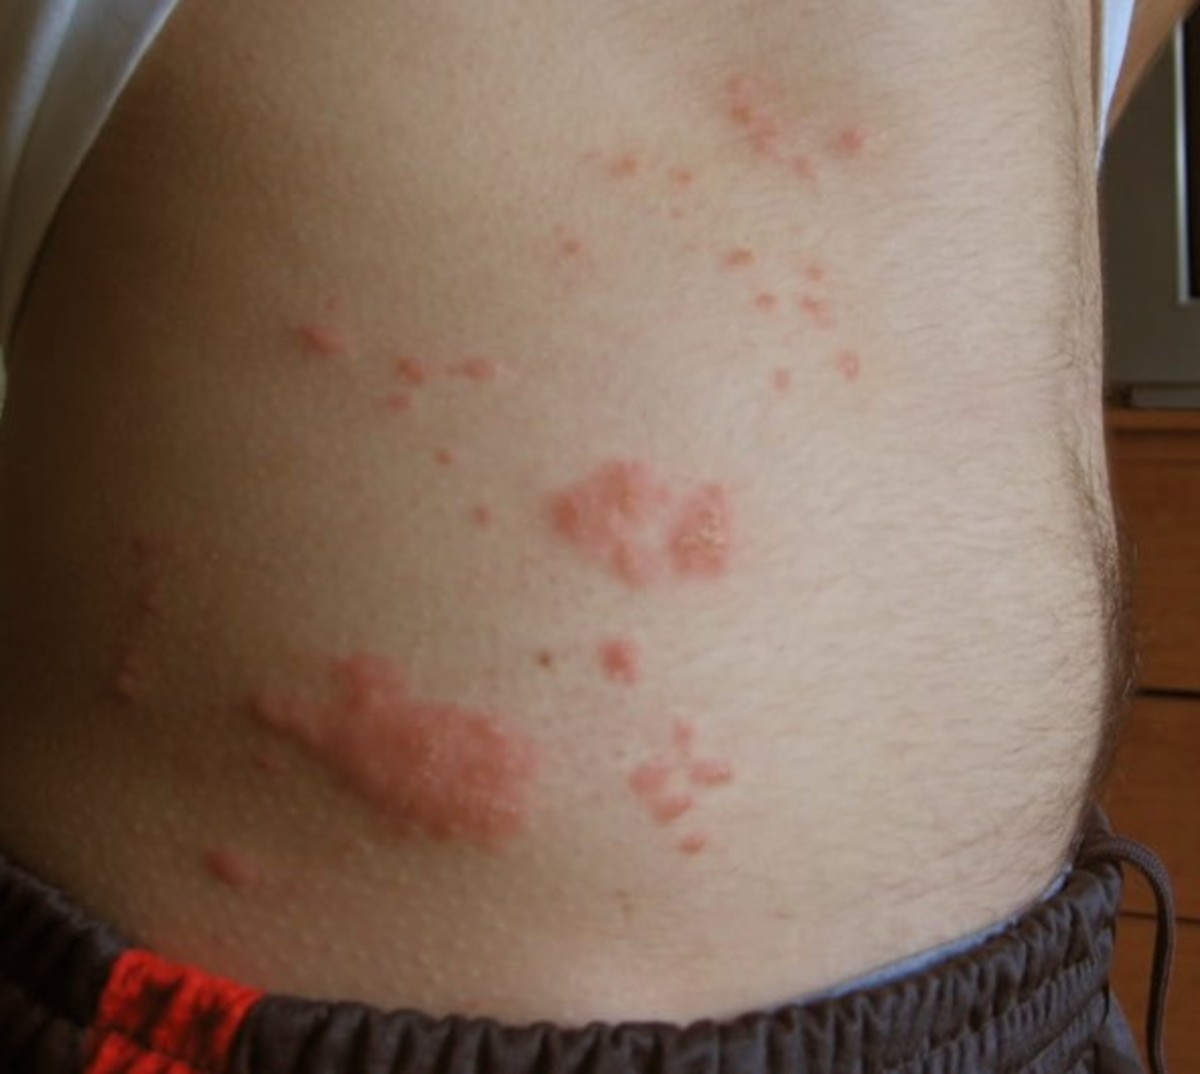 rash-on-stomach-pictures-treatment-symptoms-causes